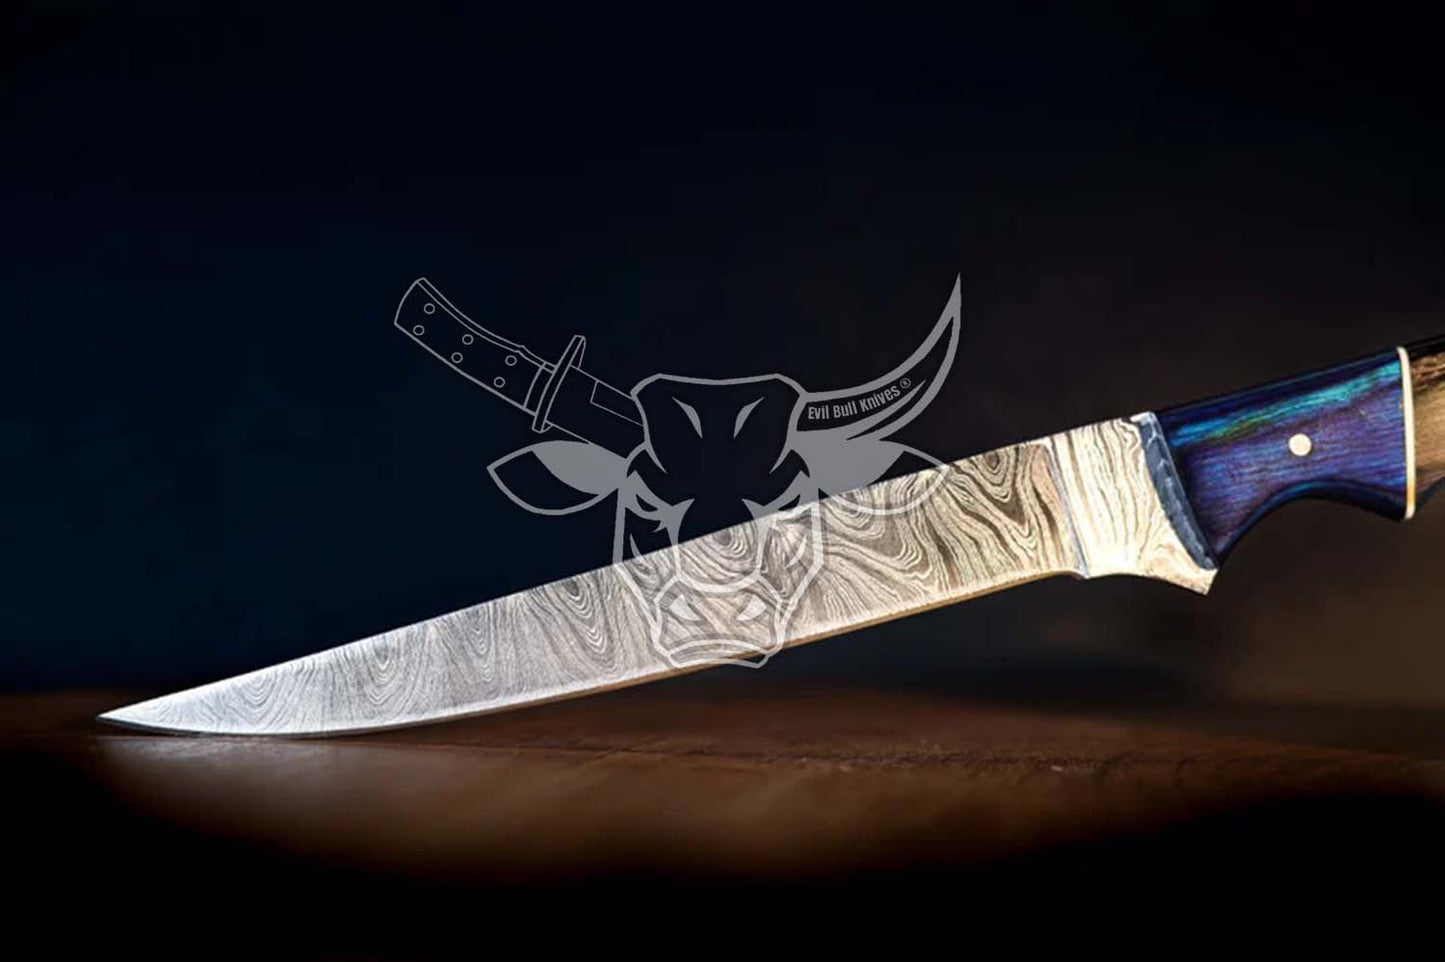 EBK-43 Fillet Fishing Knife Handmade Damascus Steel Knife with Flexible Blade Chef Gift For Special Occasions Personalize Your Kitchen Dinner Set Gift For Him